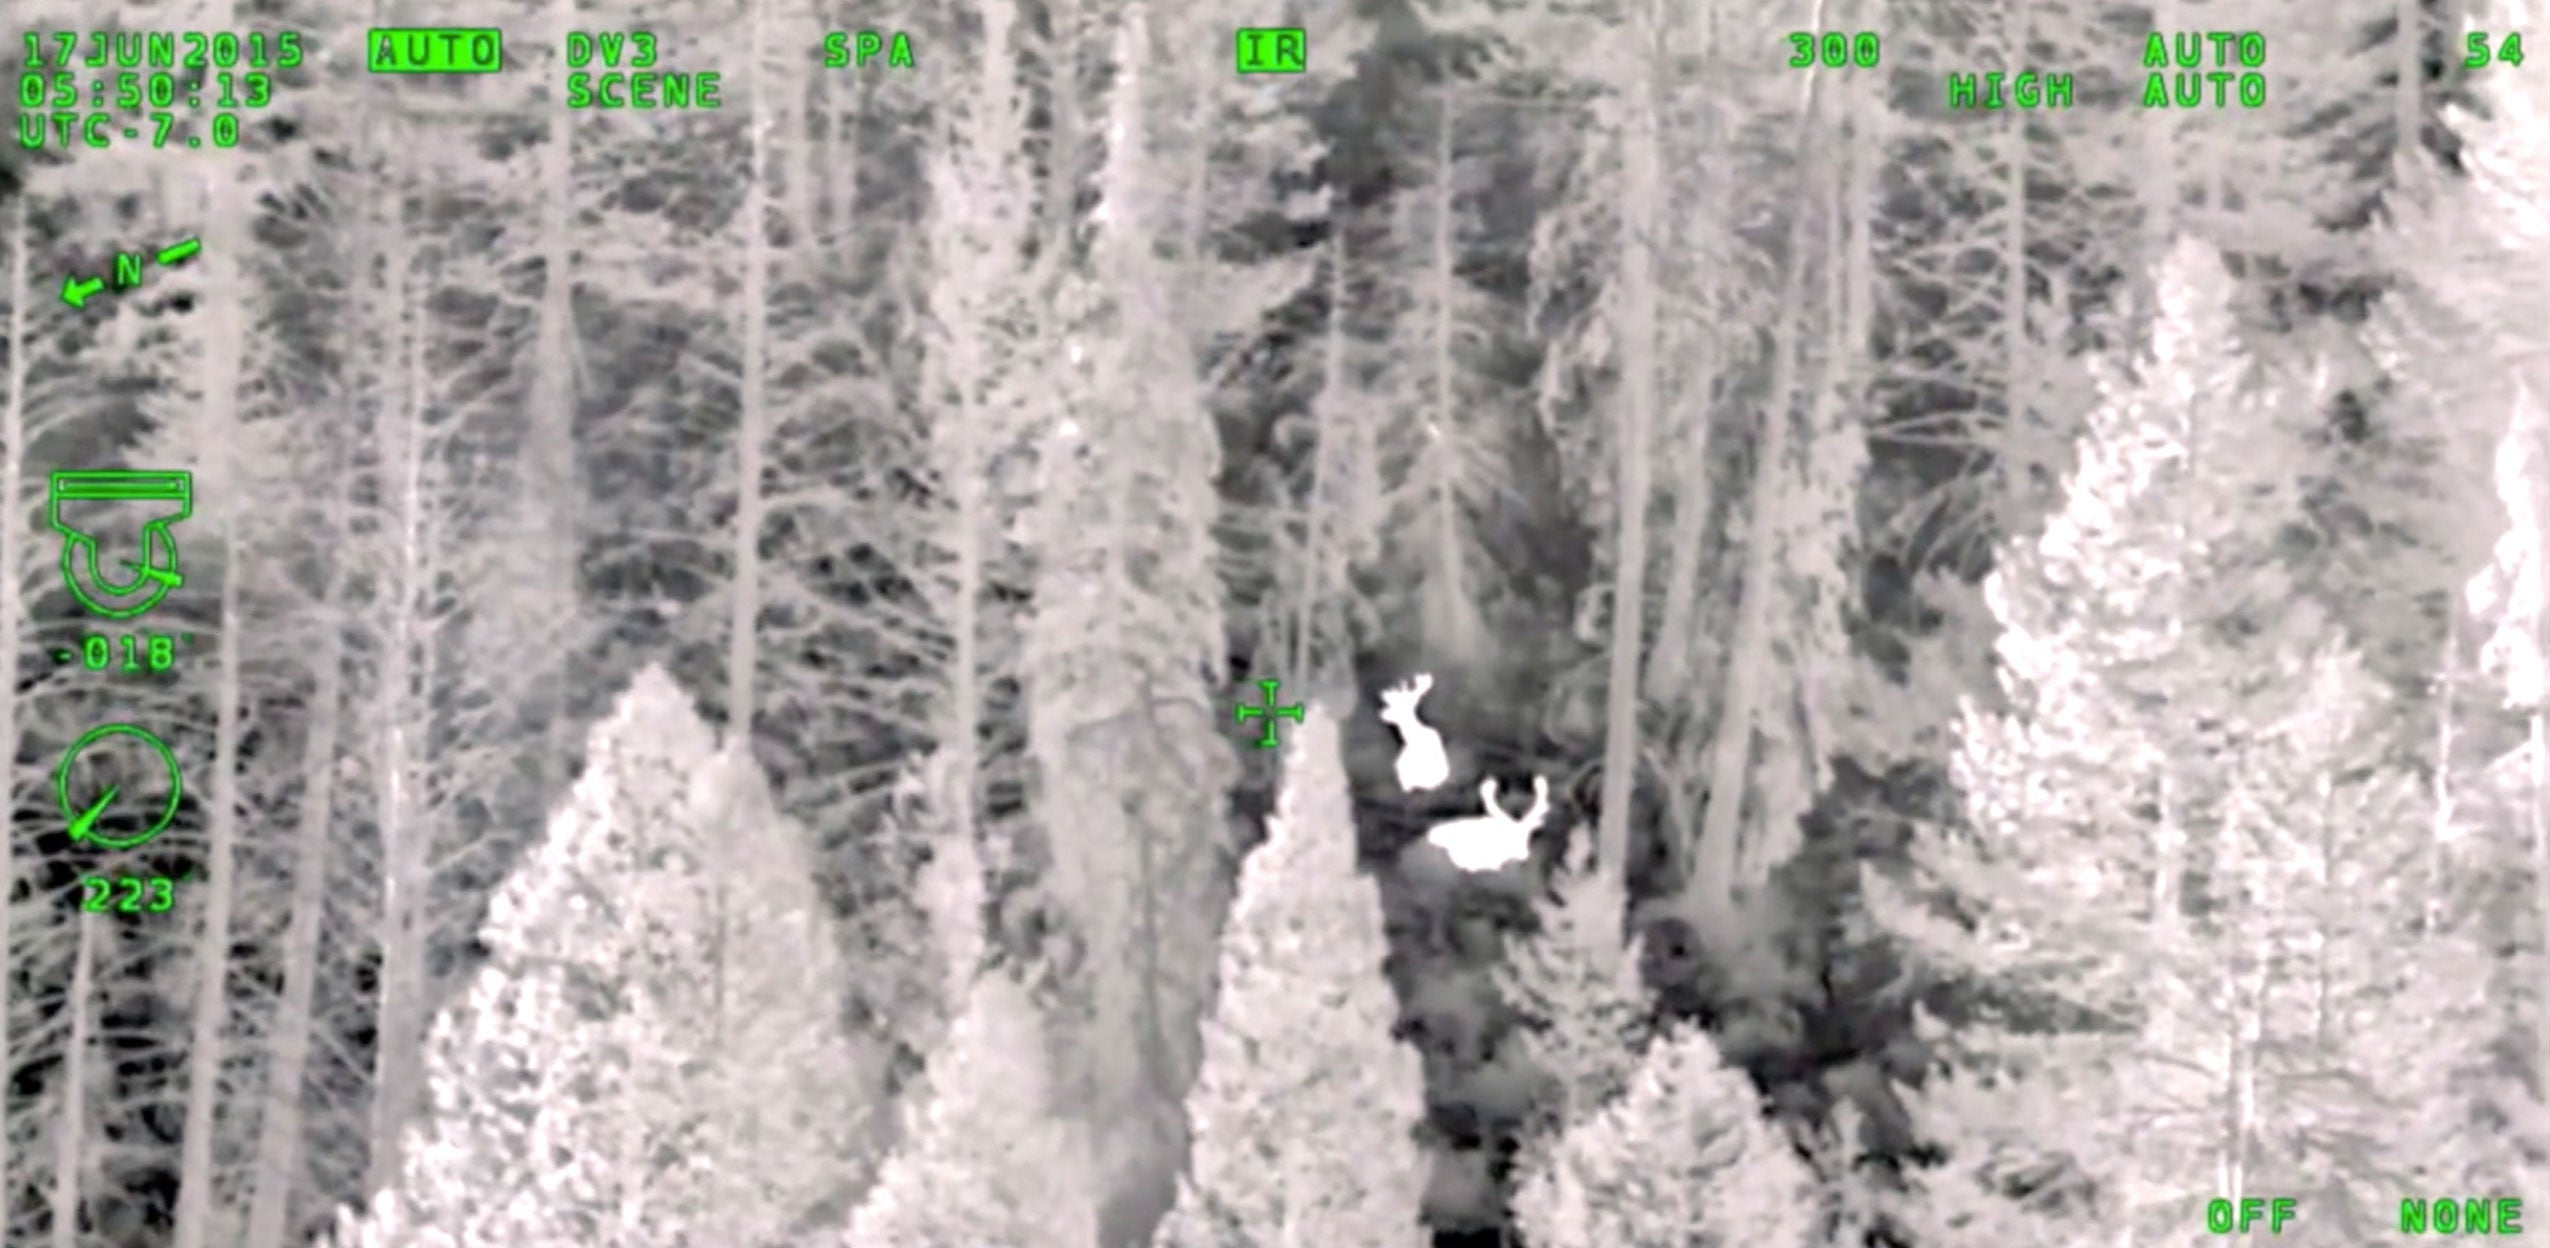 Electro-optical infrared camera image of deer in the woods captured with a WESCAM MX-Series system